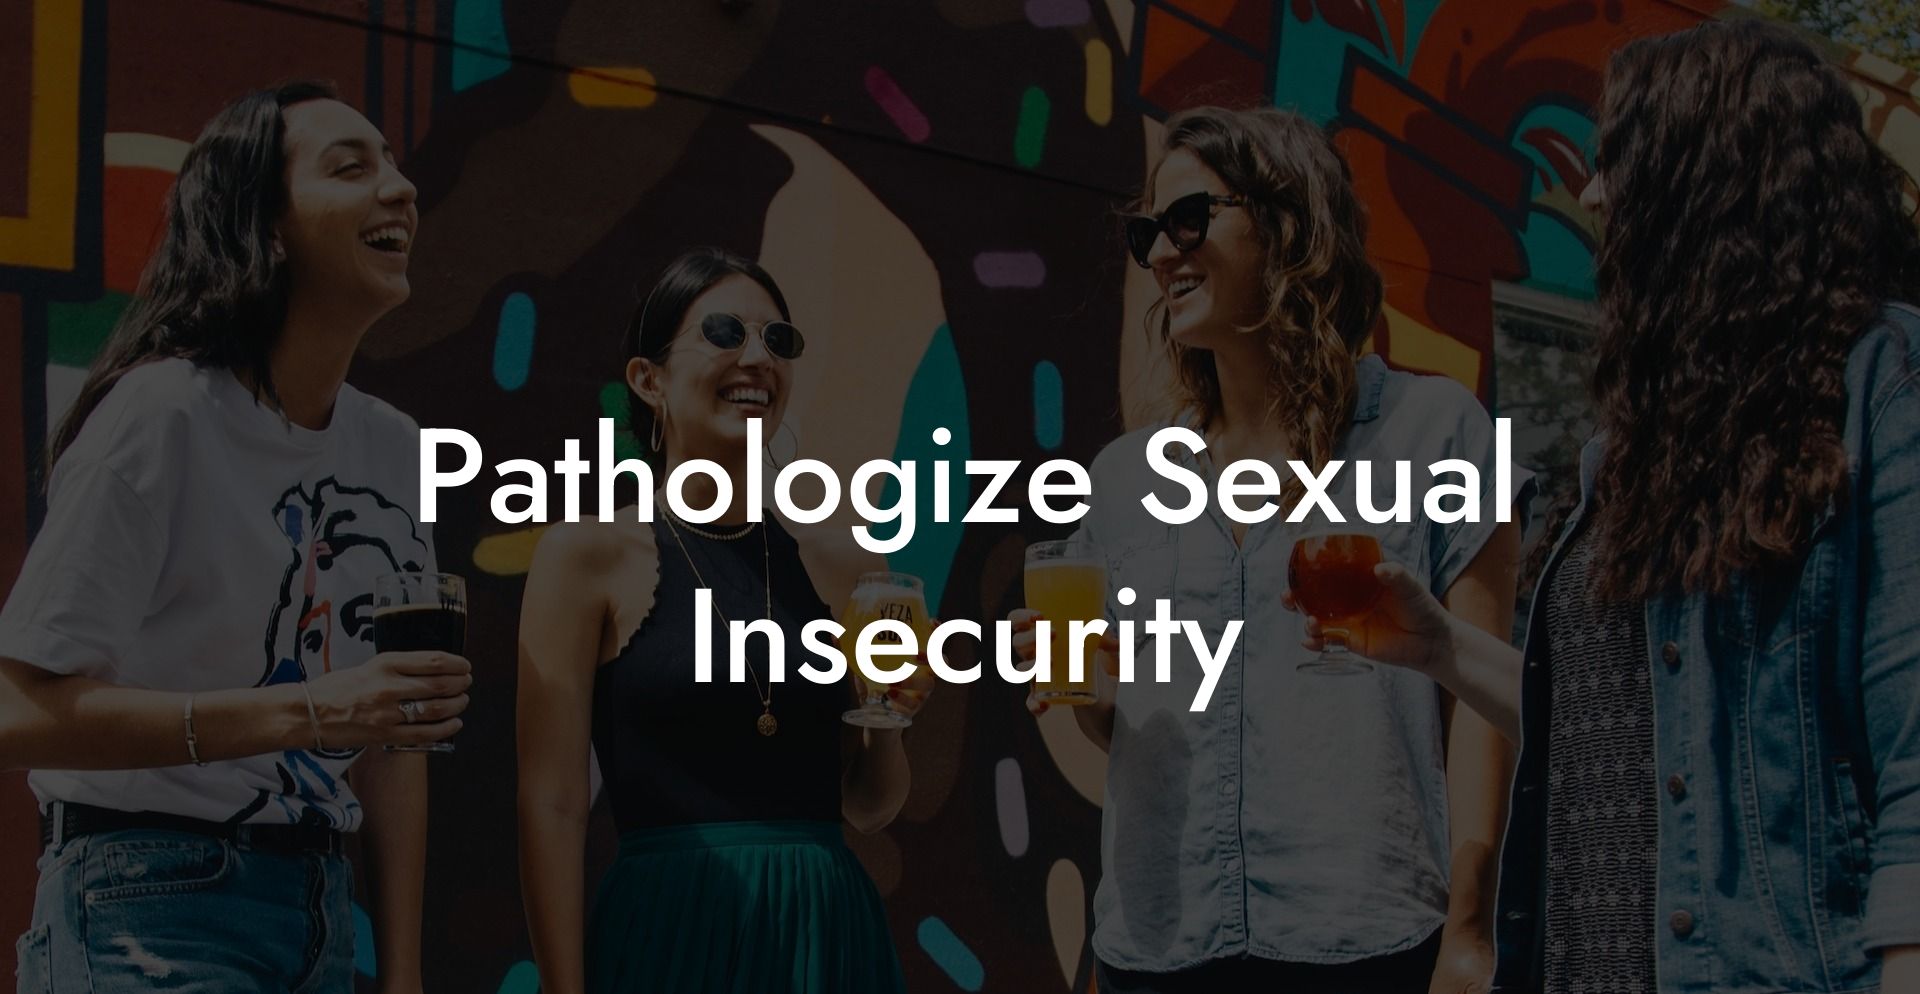 Pathologize Sexual Insecurity